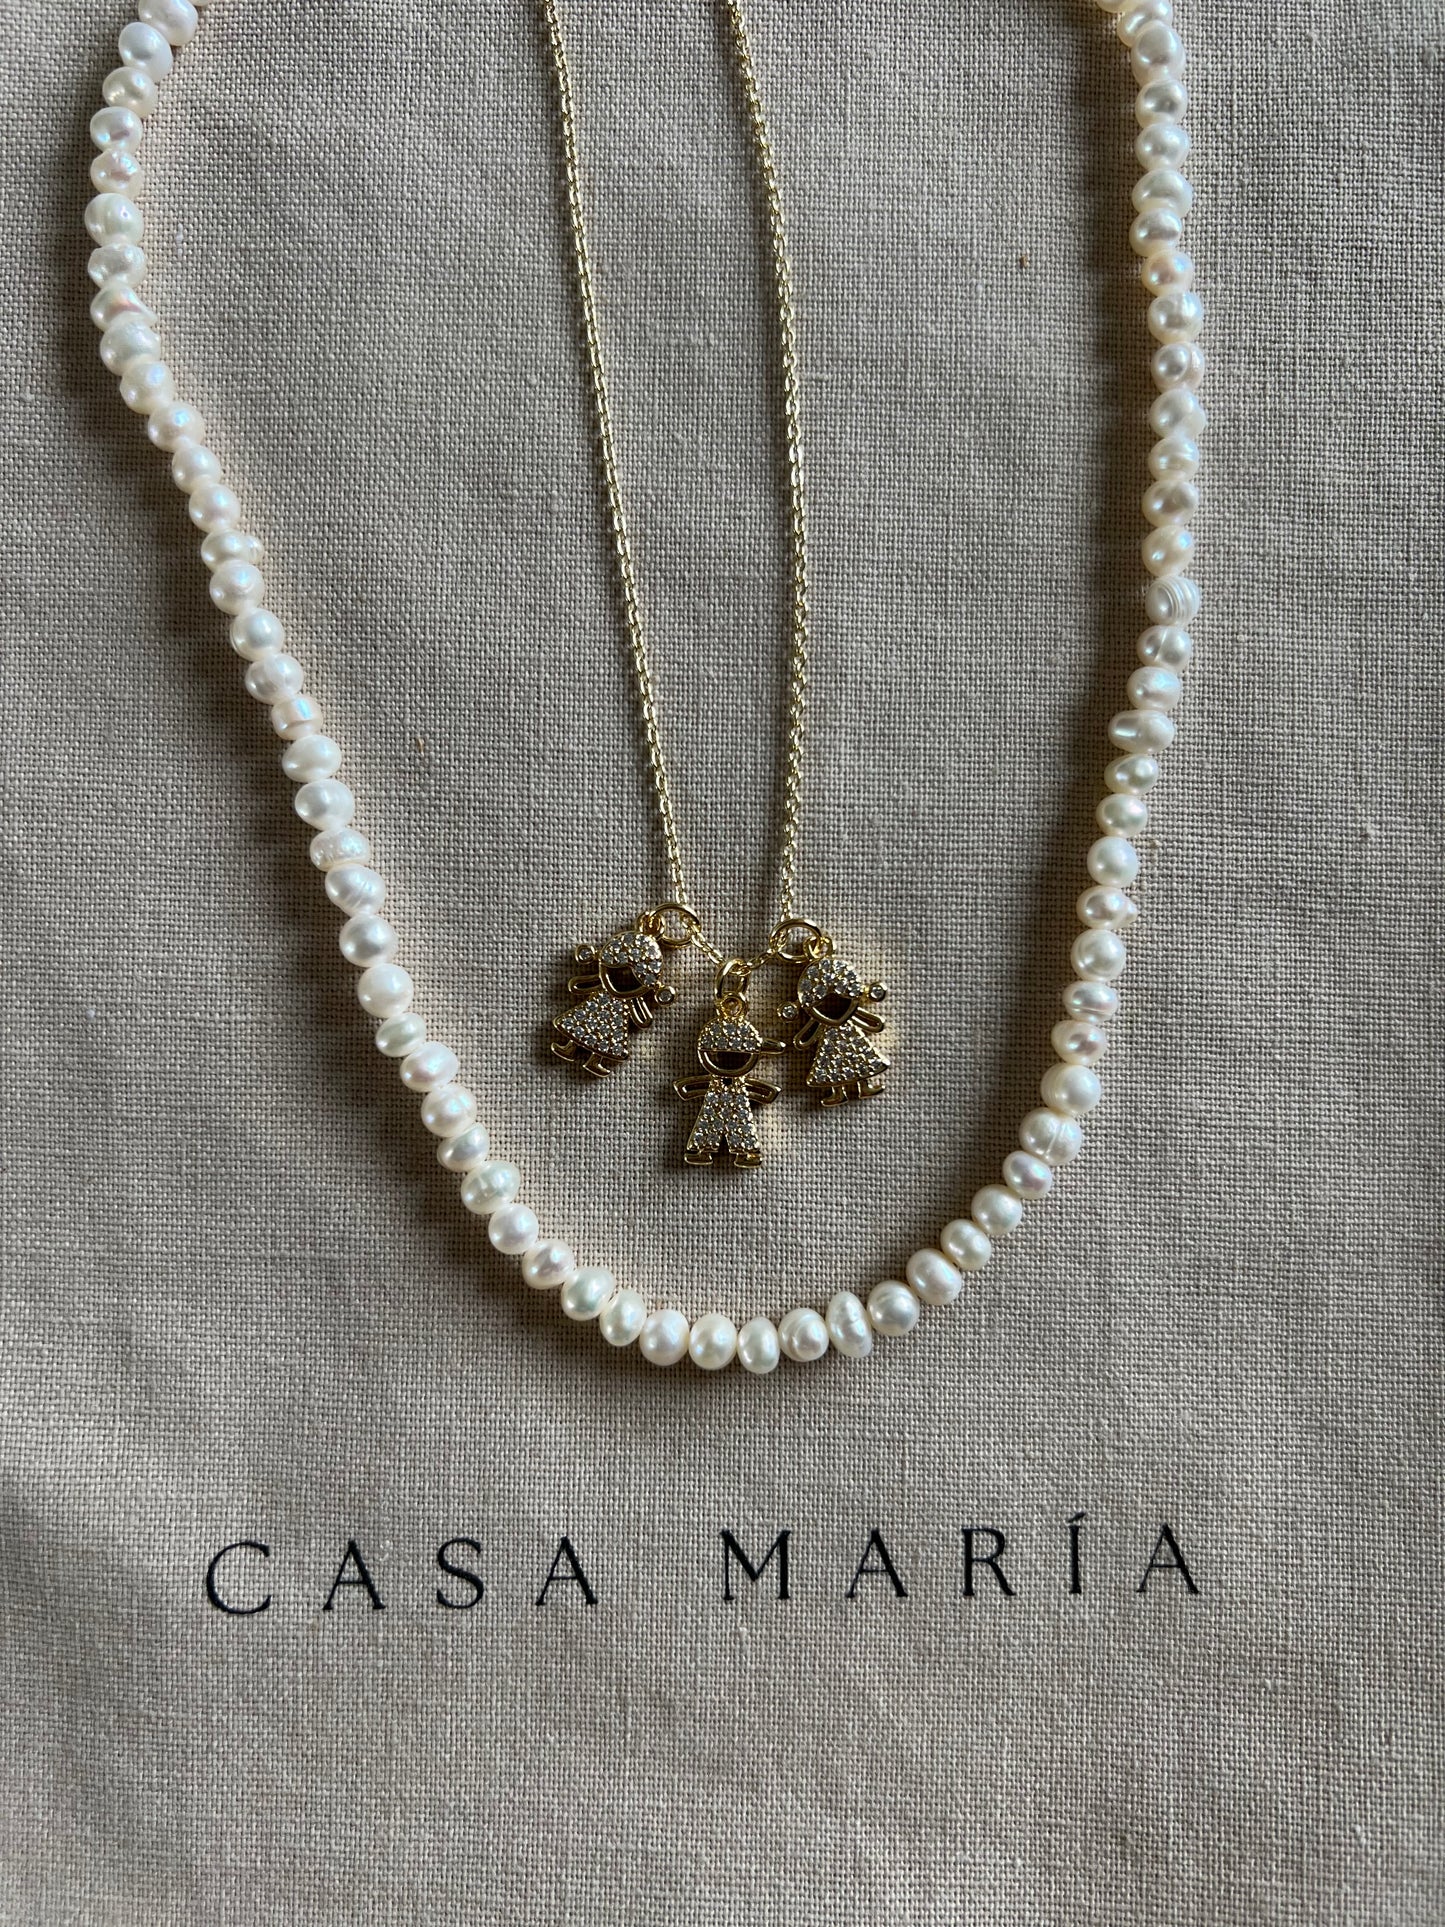 Fresh Water Pearls Necklace